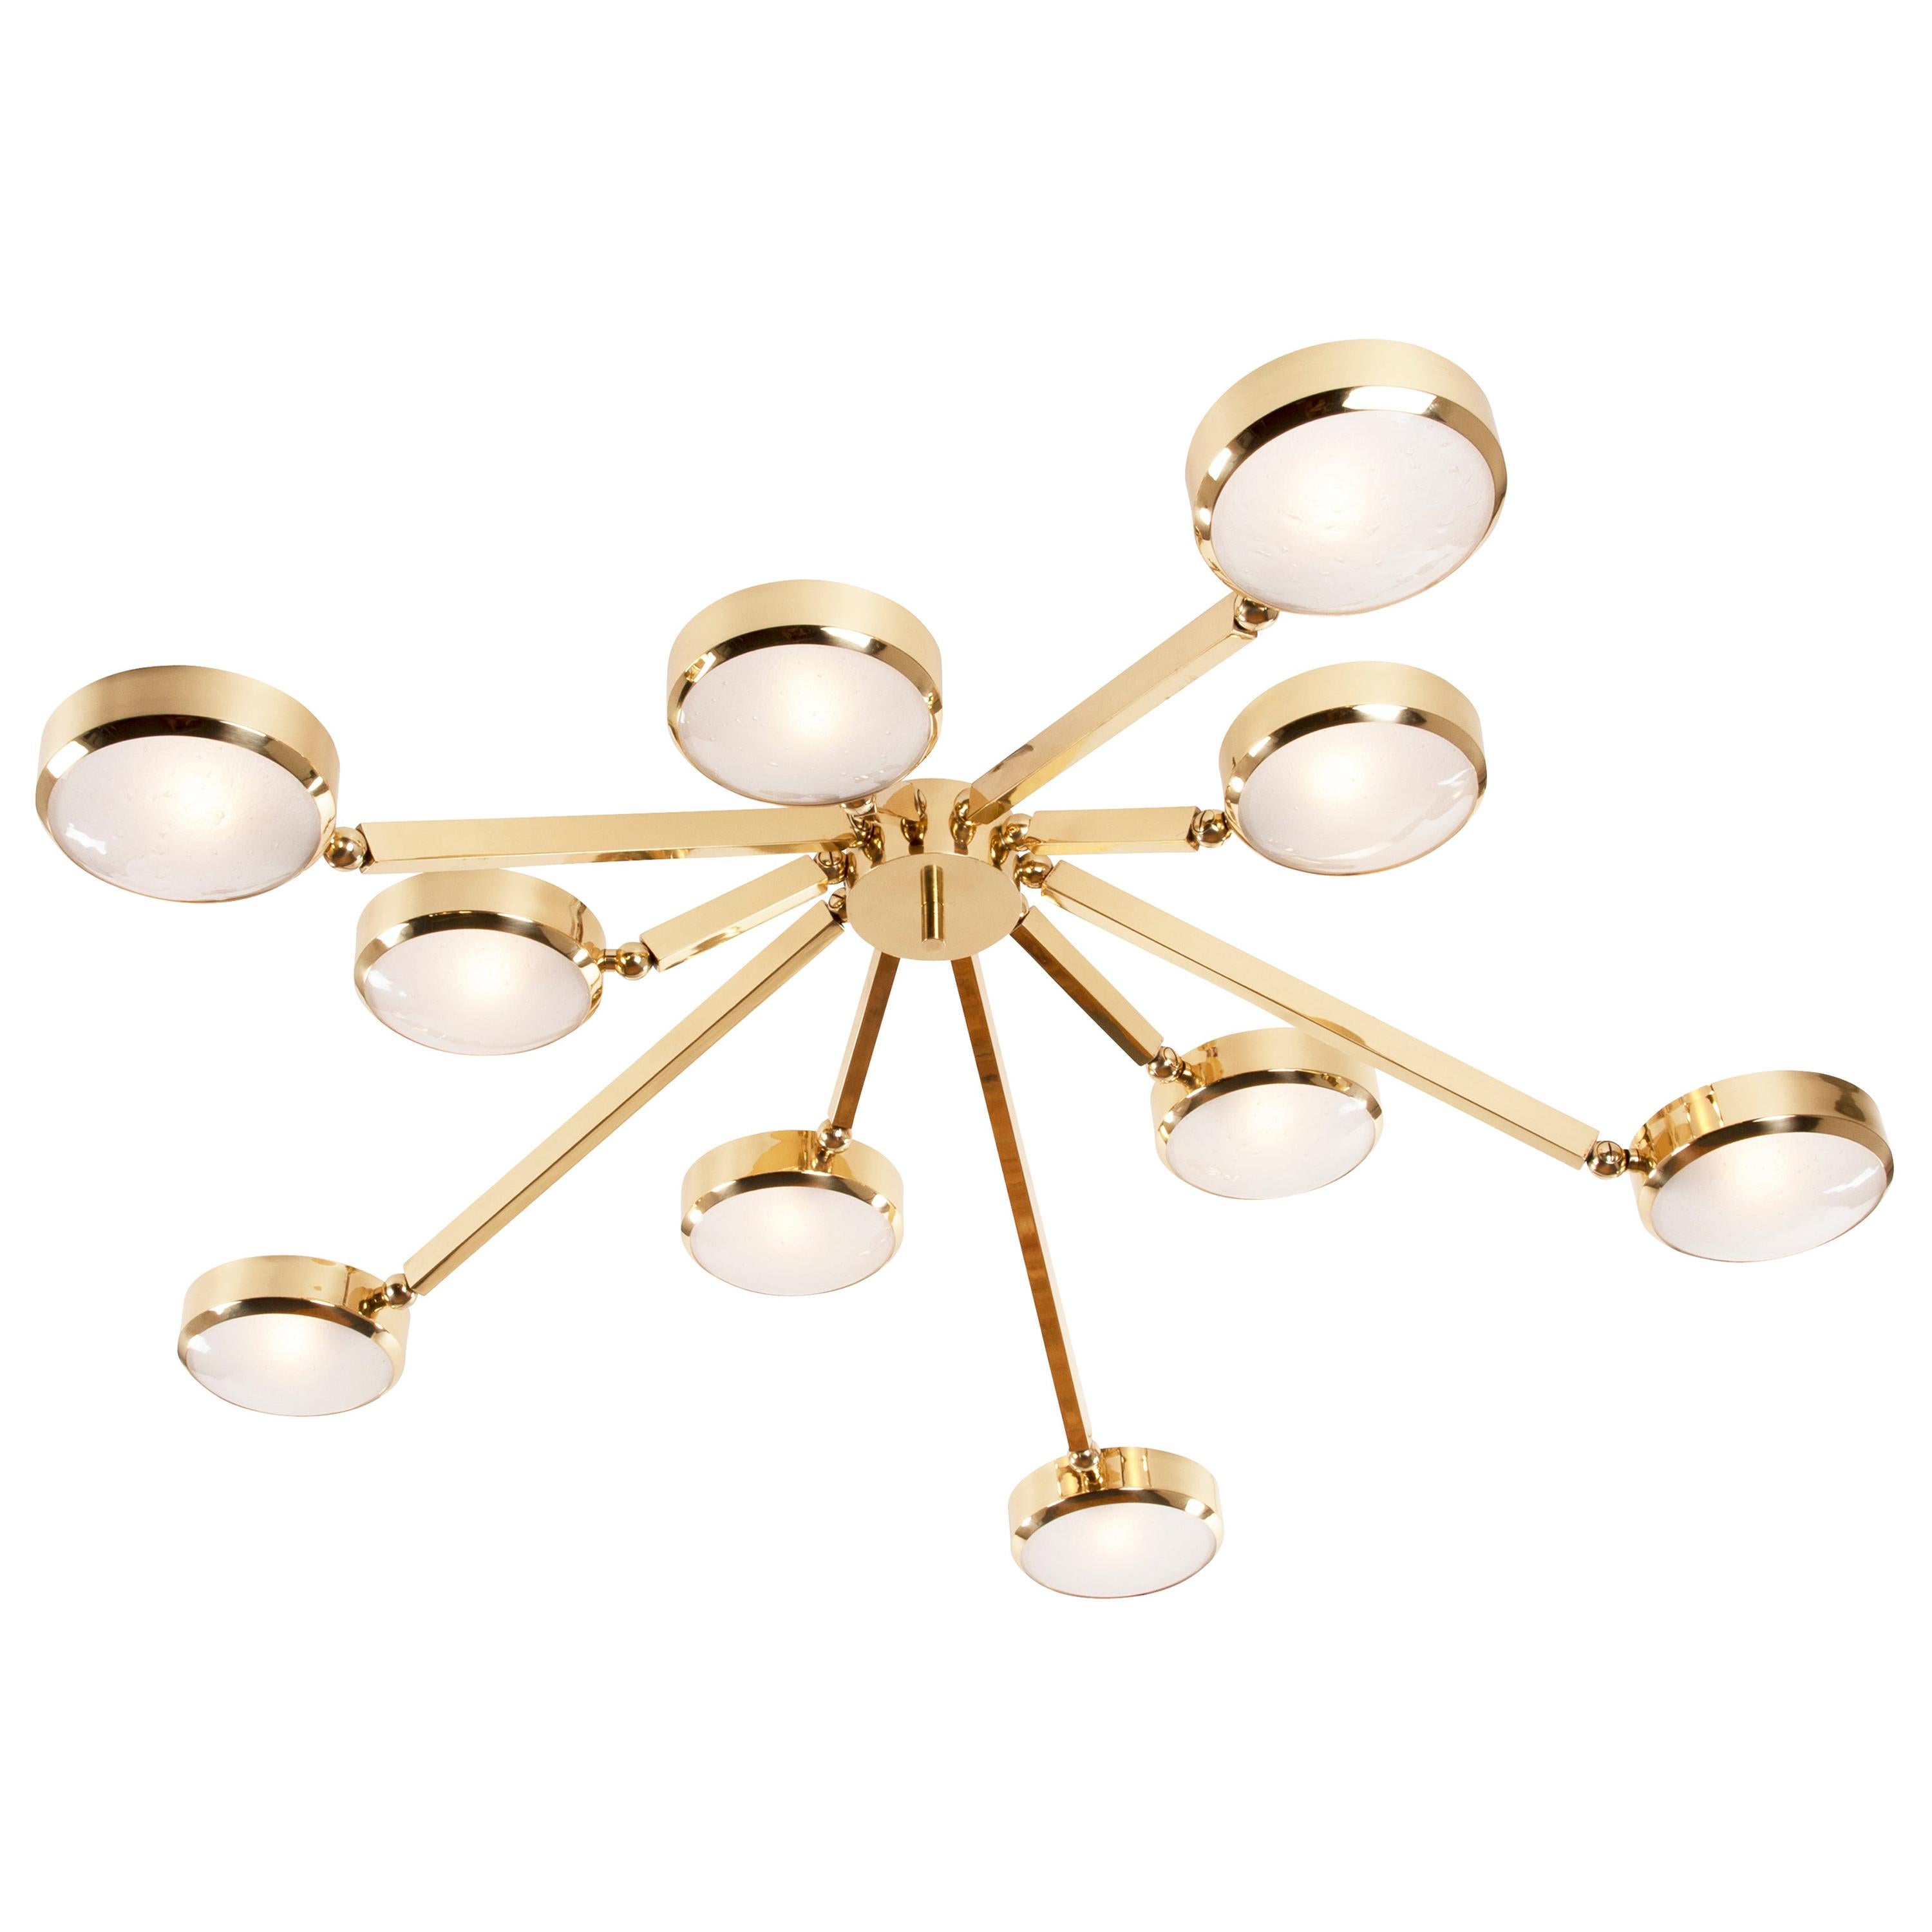 Oculus Ceiling Light by Gaspare Asaro-Murano Glass and Polished Brass Finish For Sale